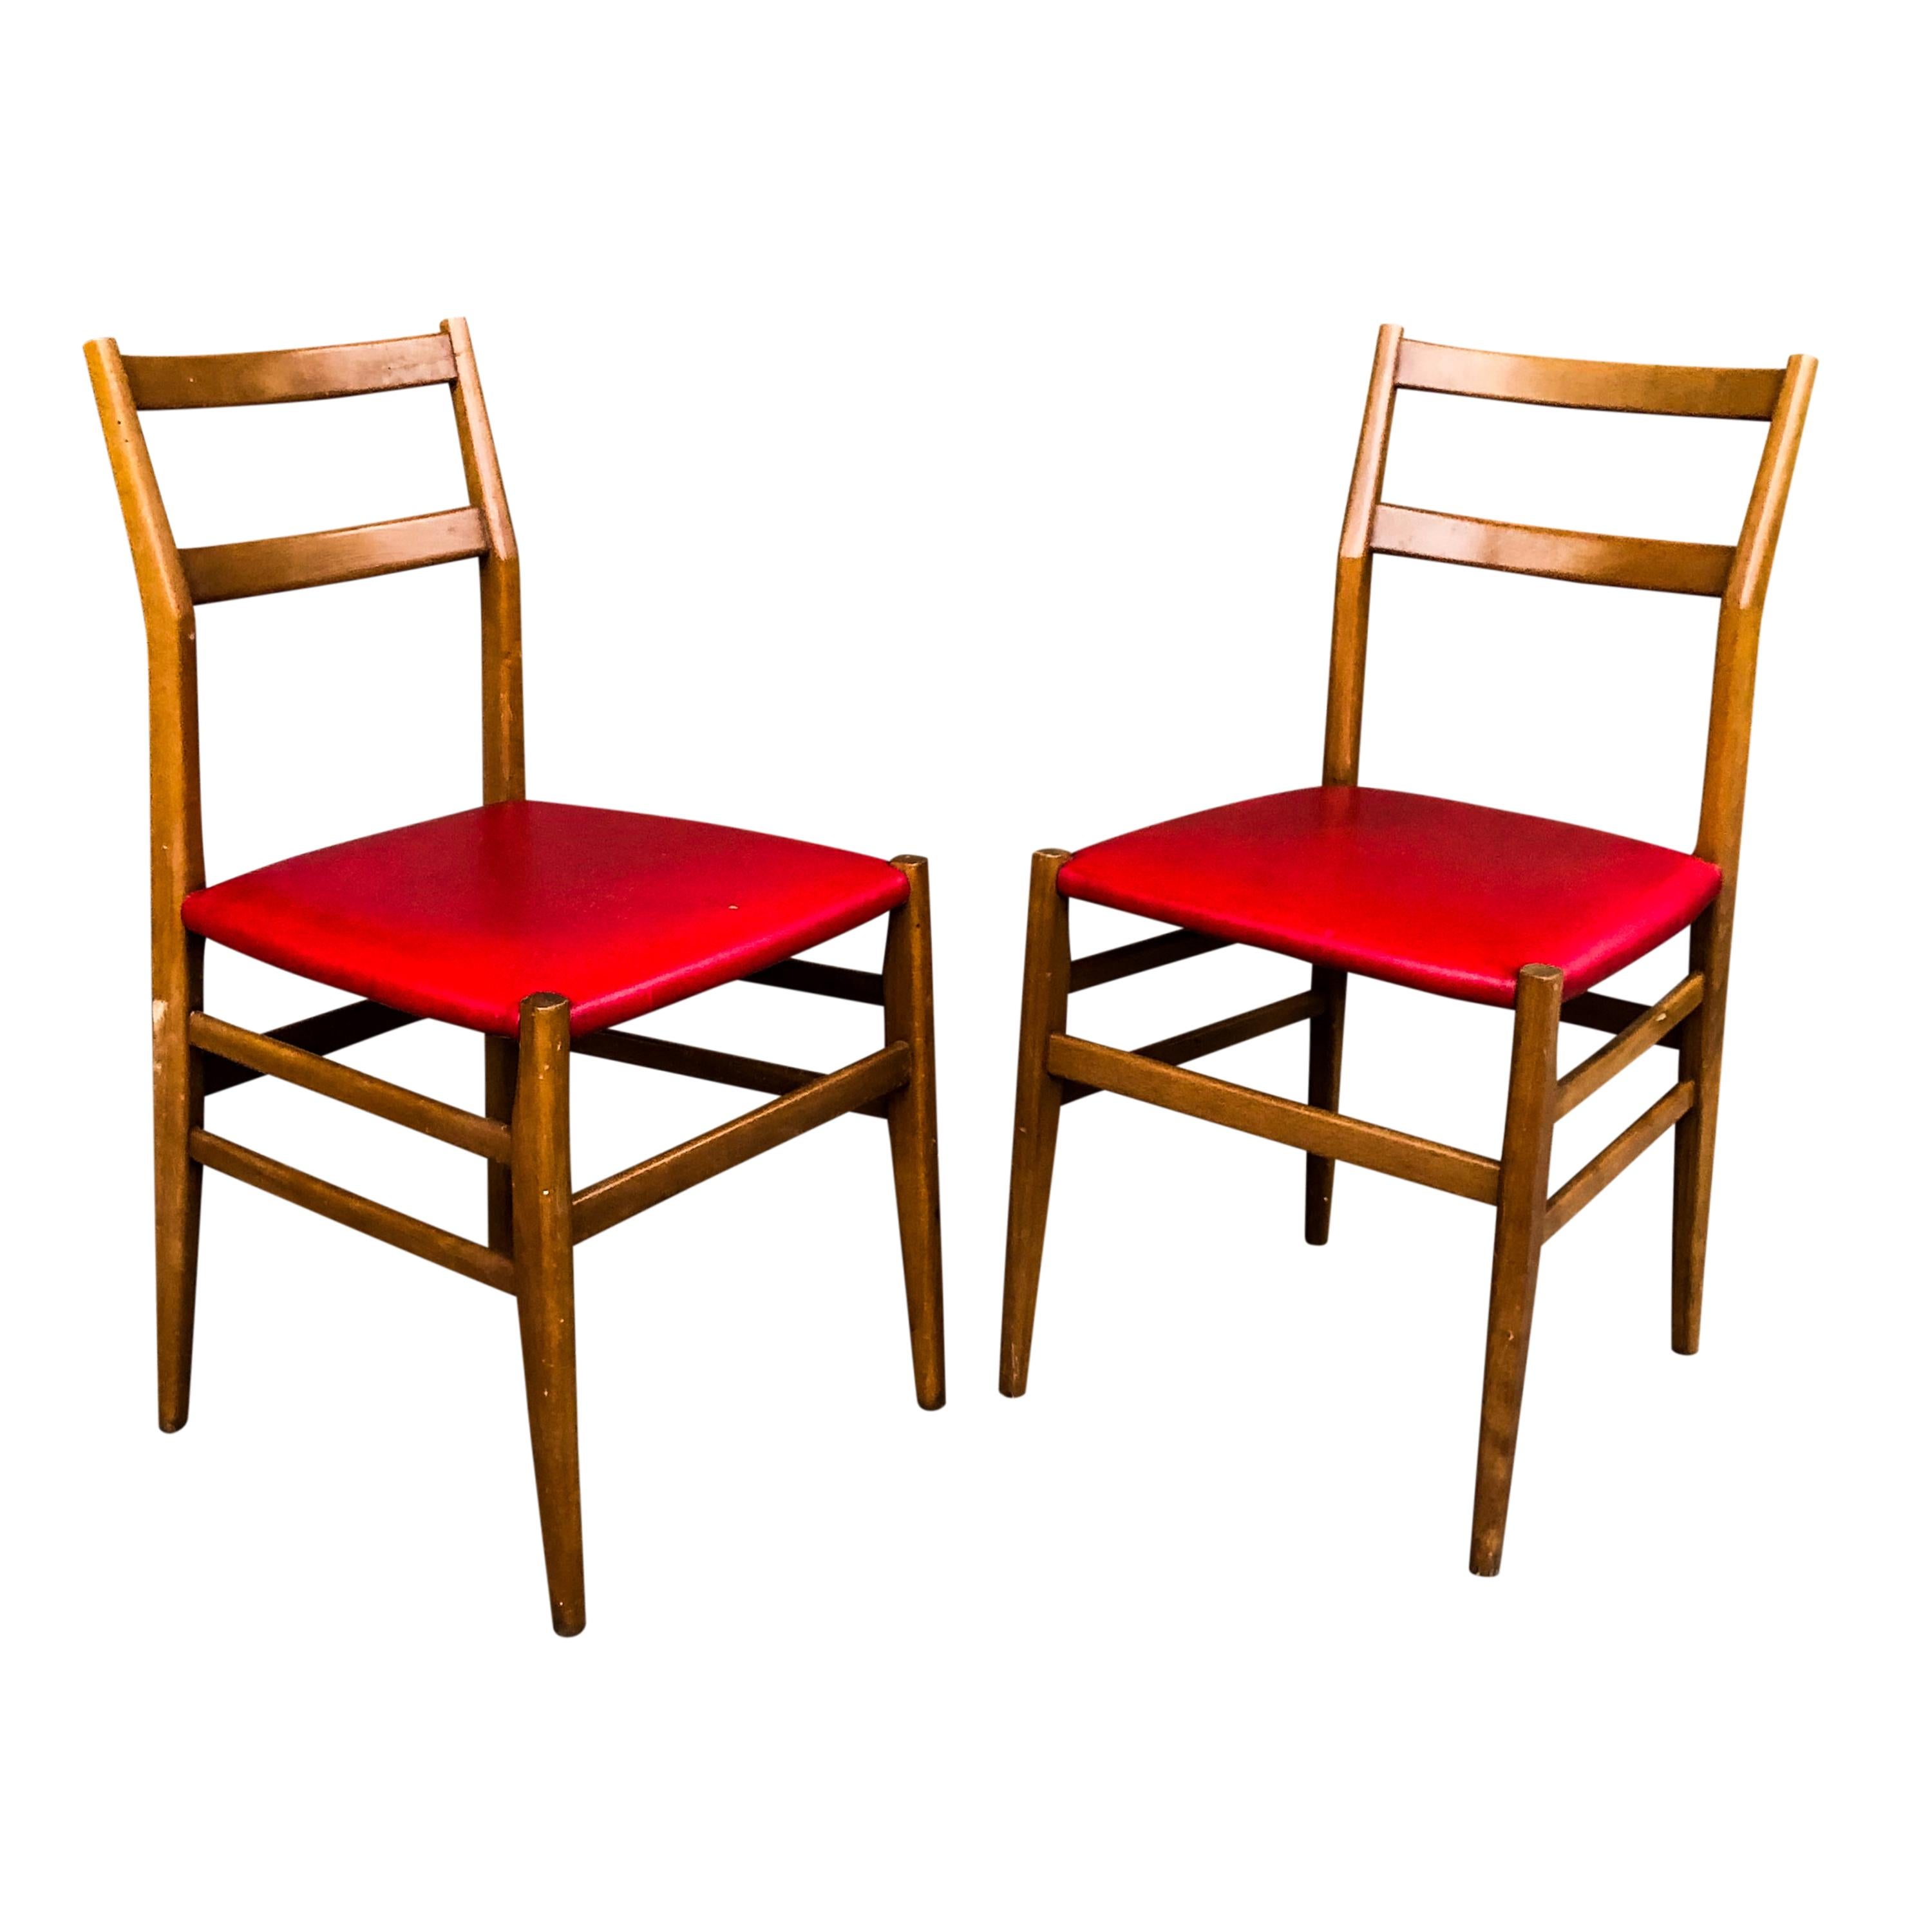 Red Faux Leather Leggera Dining Chairs by Gio Ponti for Cassina, 1960s, Set of 6 For Sale 3